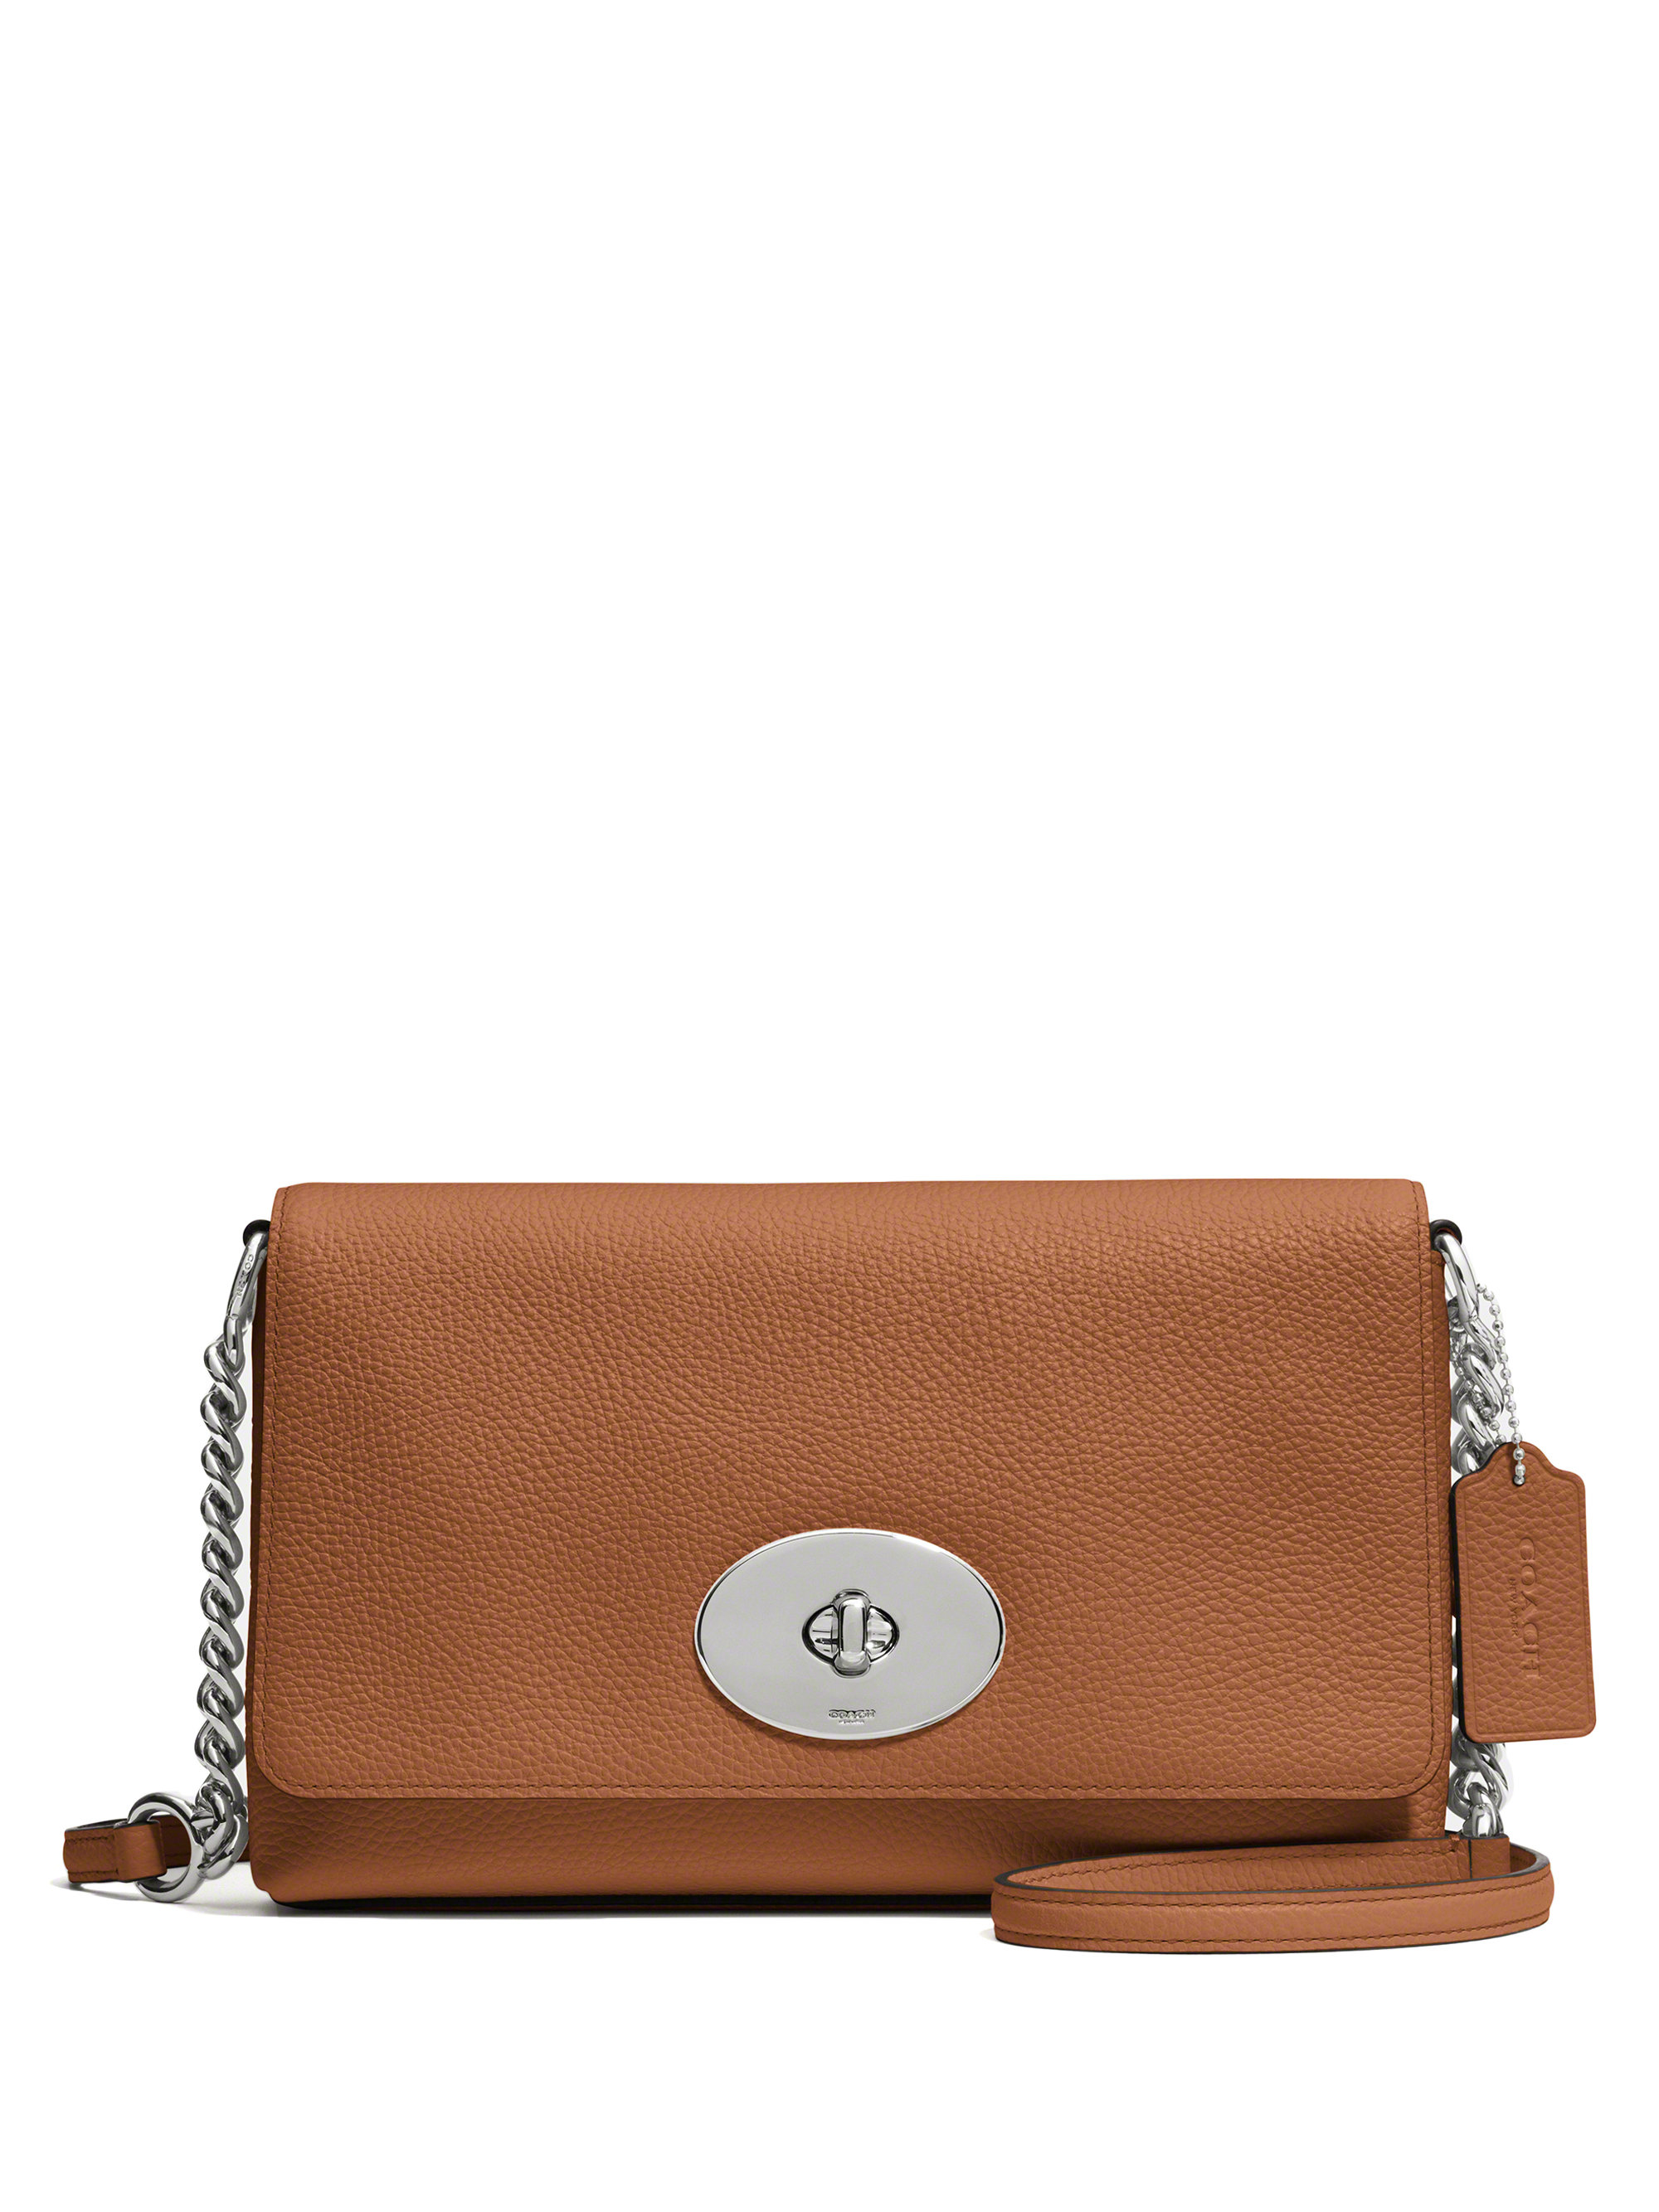 Coach Crosstown Pebbled Leather Crossbody Bag in Brown (saddle-silvertone hardware) | Lyst